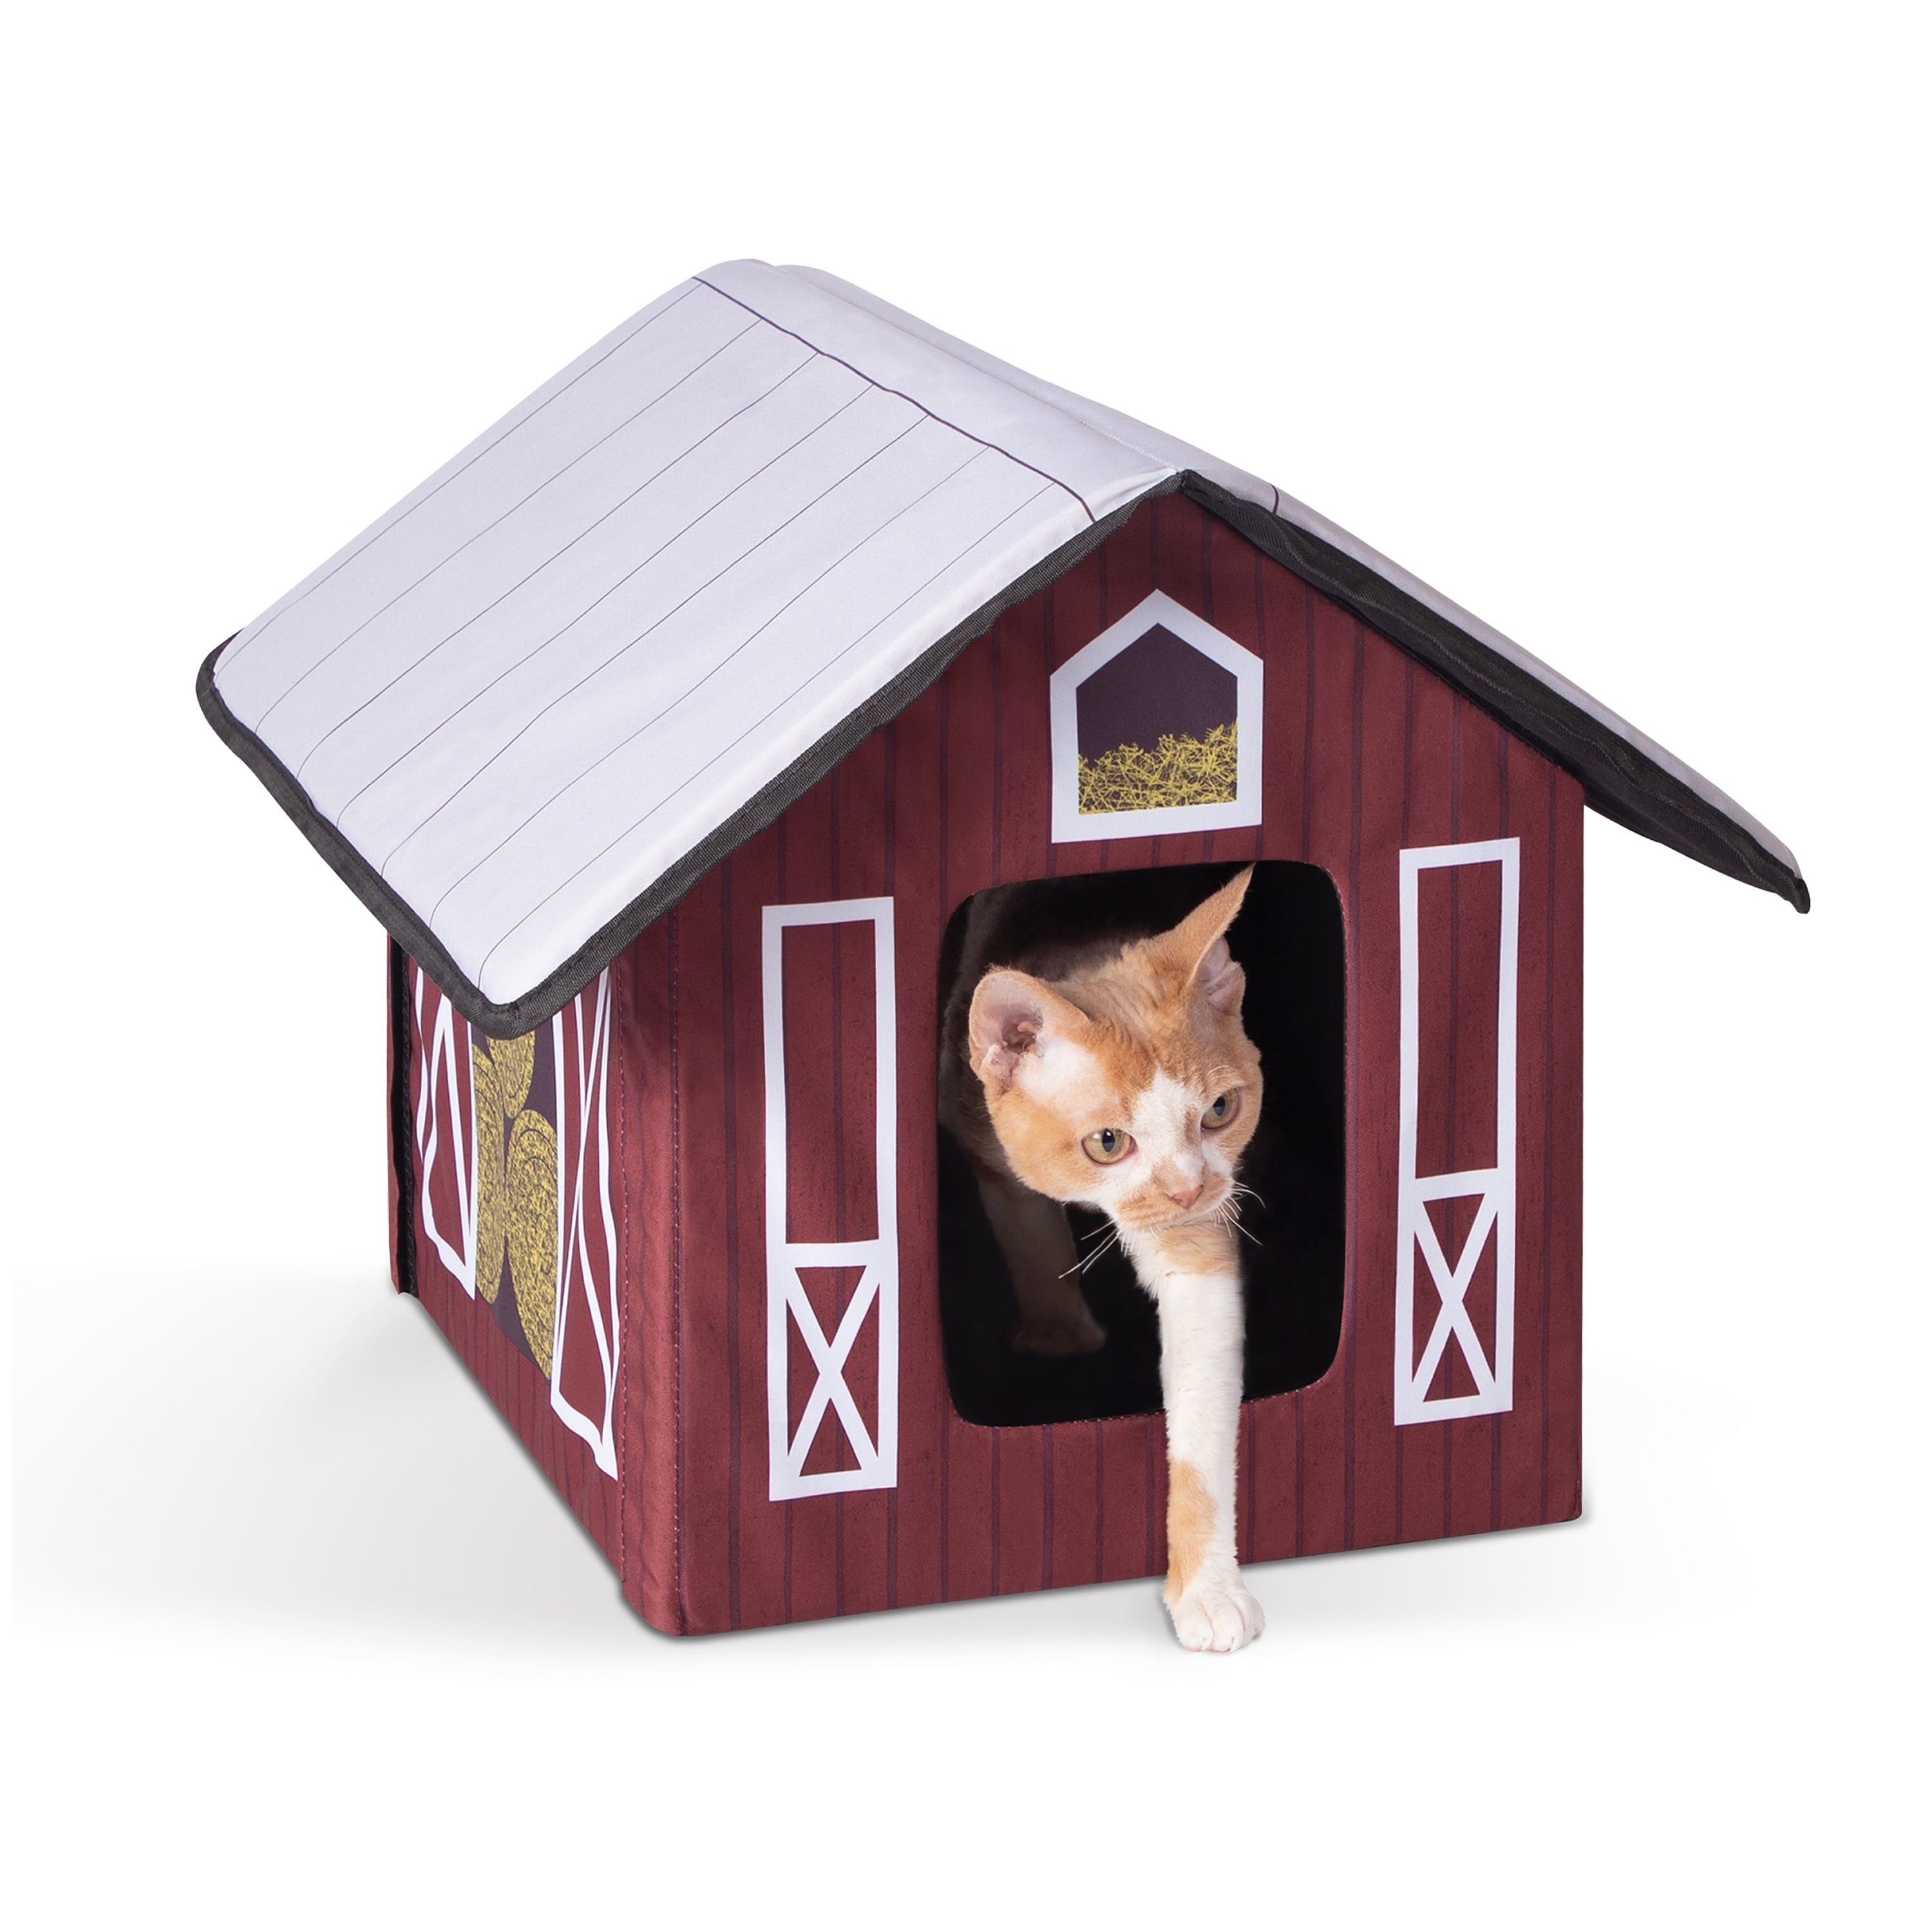 Feral Cat House Foldable Kitty House Cat Shelter for Pets Waterproof Pet Outdoor Cat House